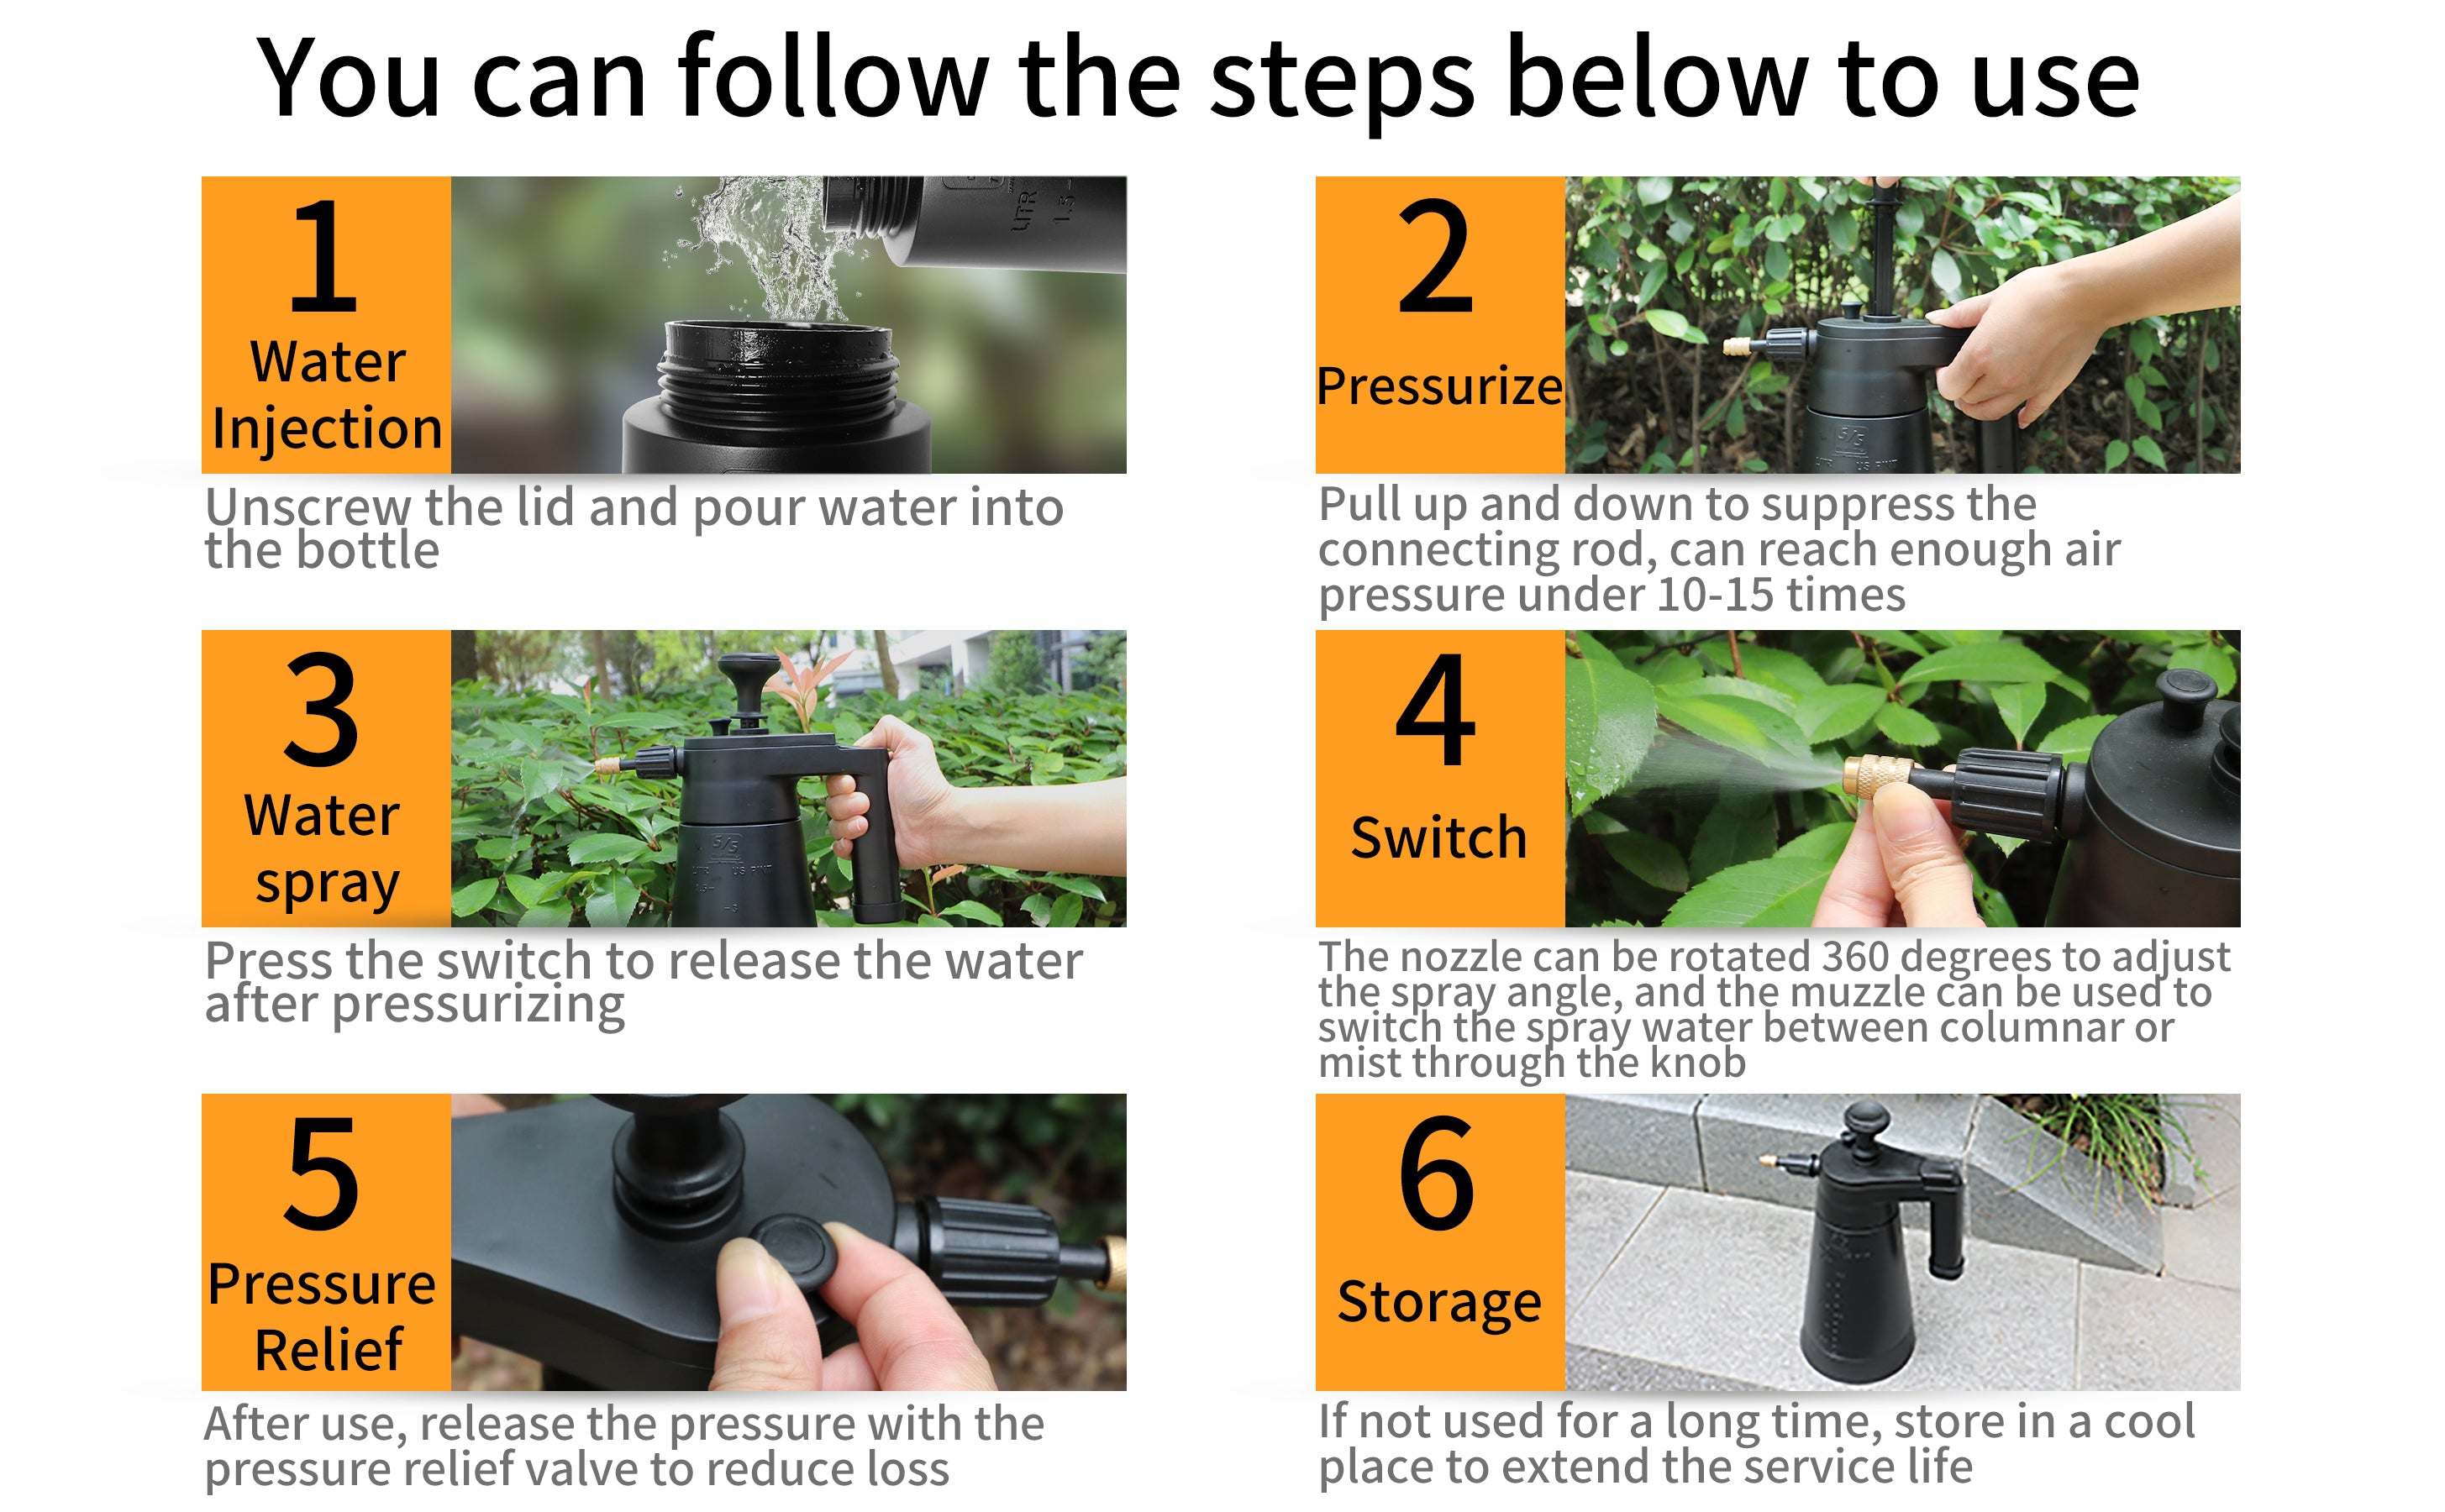 You can follow the steps below to use